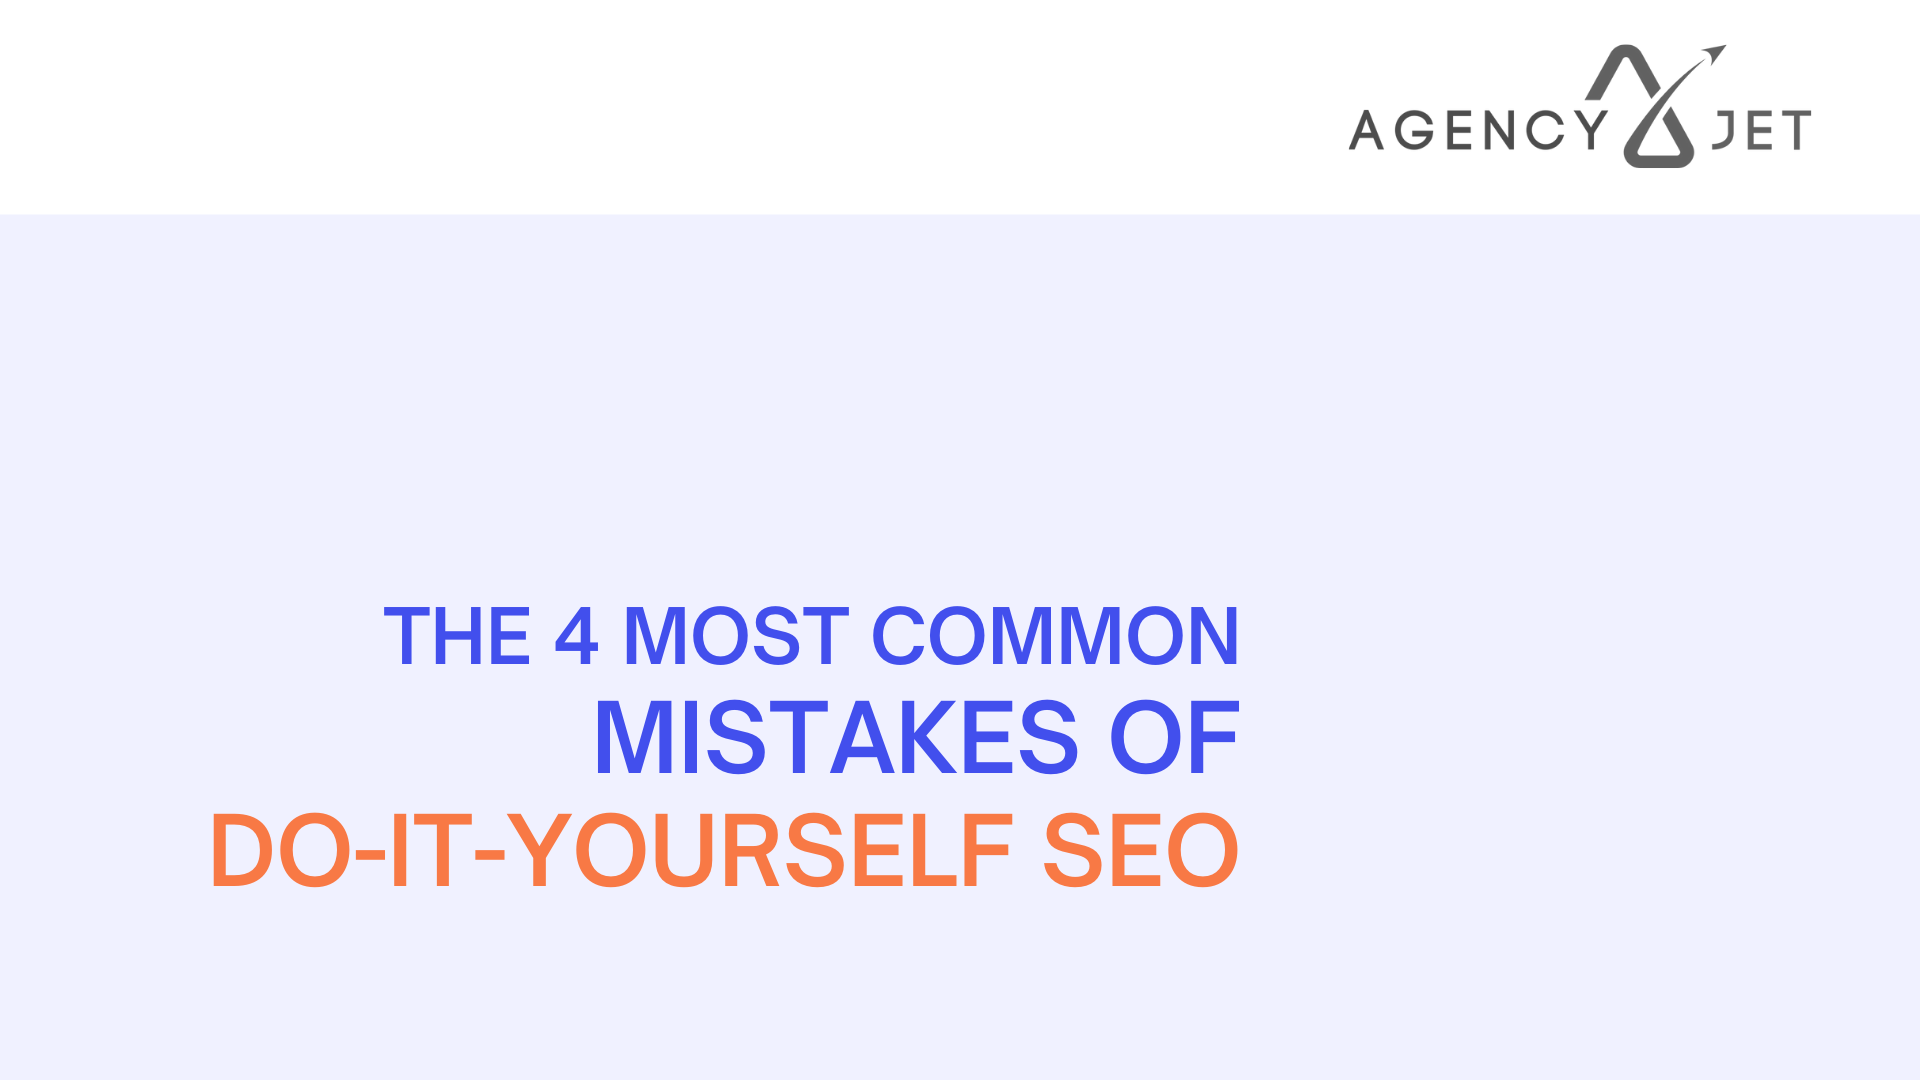 The 4 Most Common Mistakes of Do-It-Yourself SEO - Agency Jet